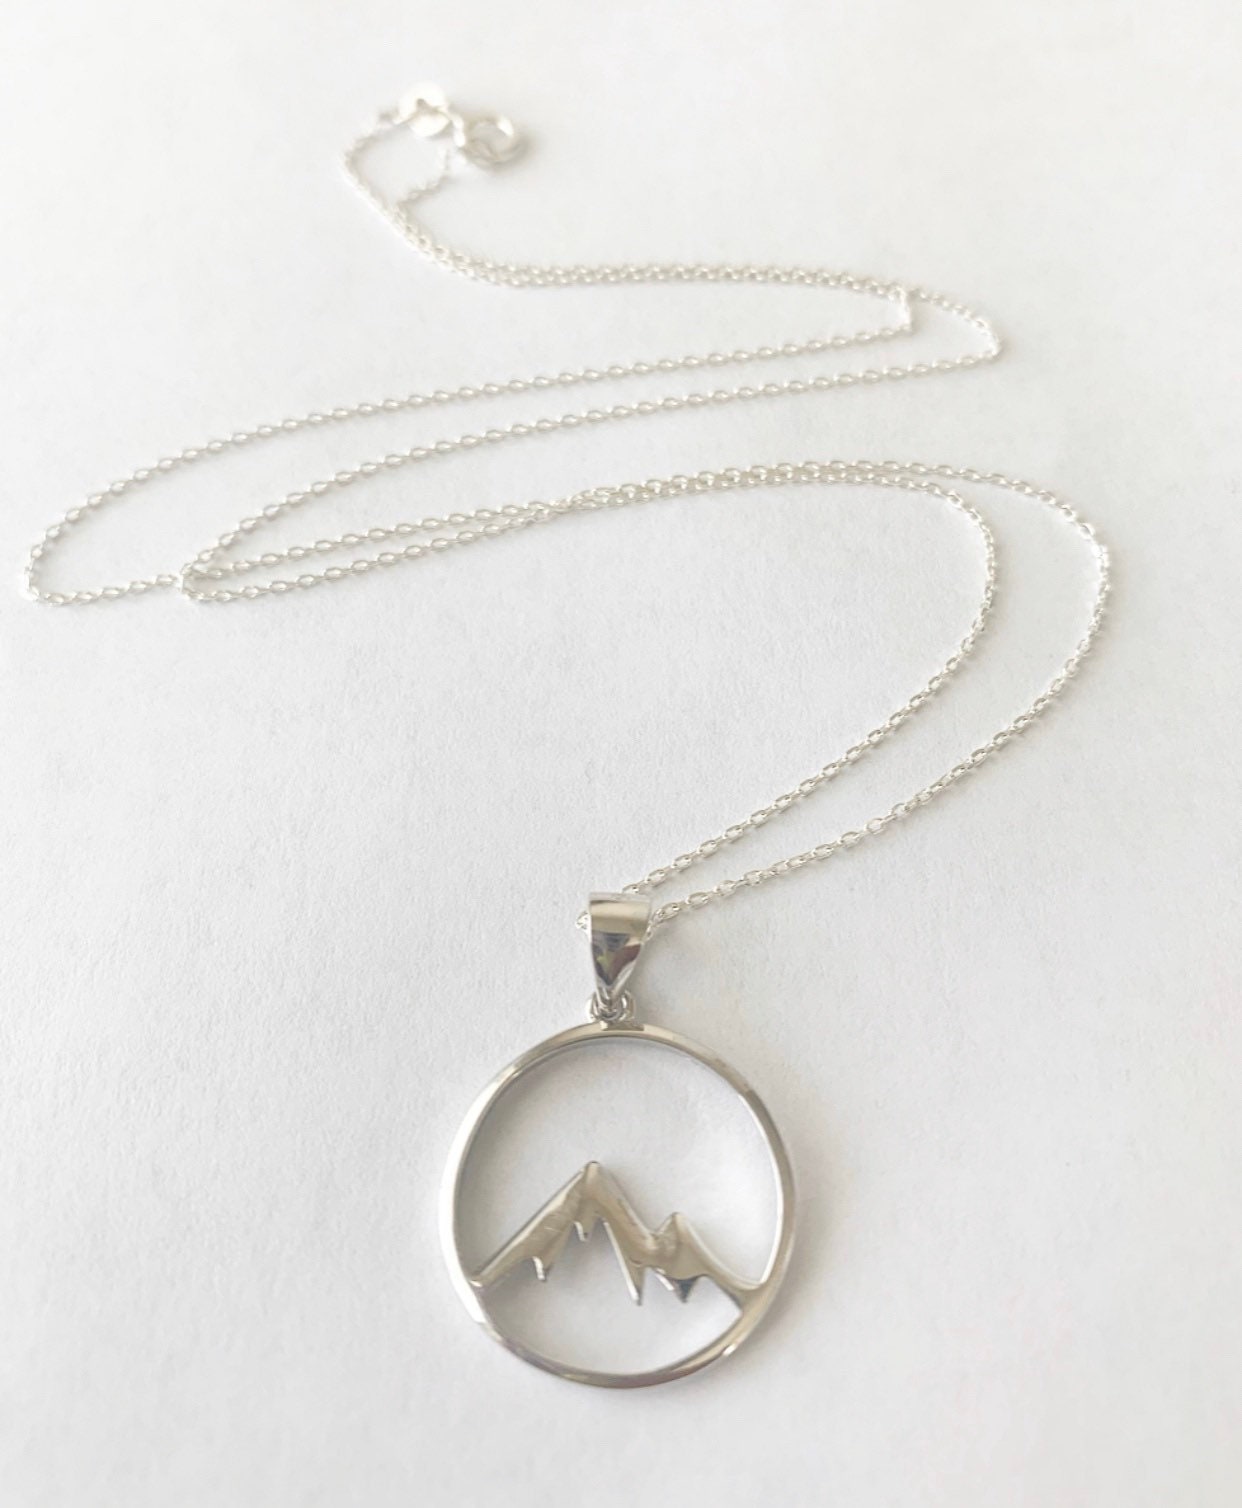 Mountain Necklace 925 Sterling Silver, Mountain Charm, Mountain Pendant,  Handmade Jewelry, Gift for Her, Necklace for Women, Birthday Gift - Etsy | Mountain  necklace, Mountain range necklace, Handmade jewelry